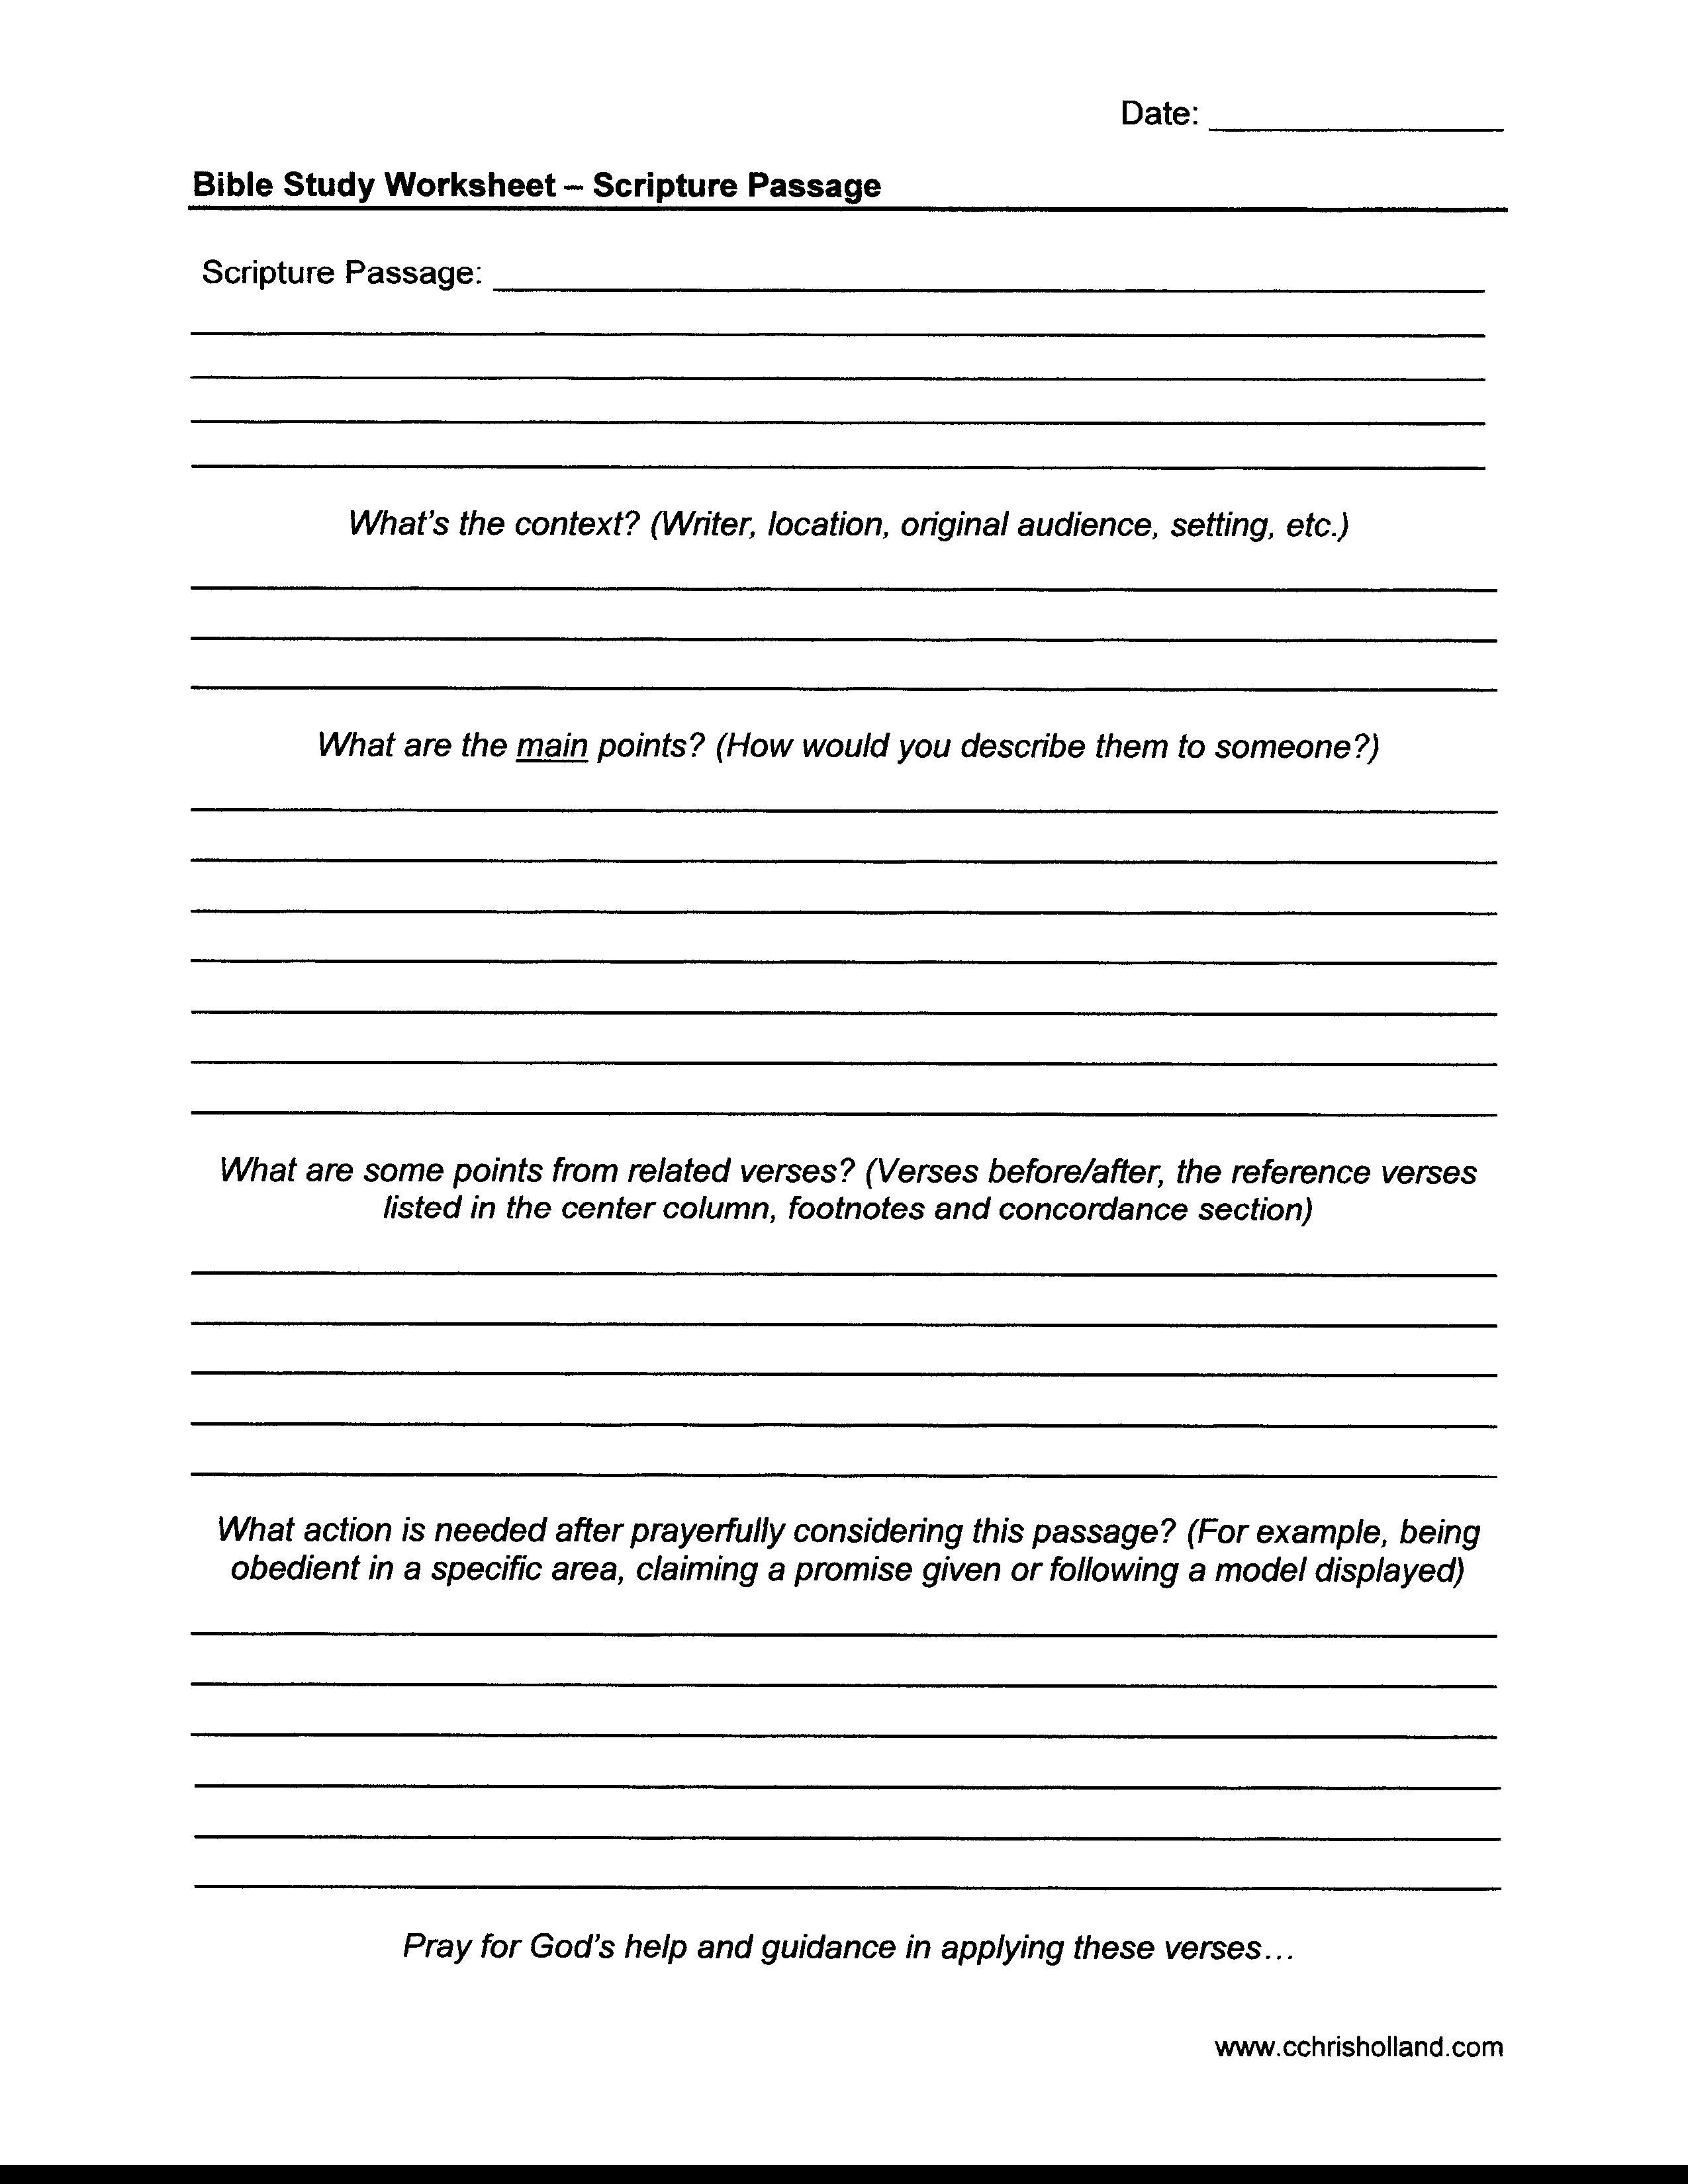 Bible Study Worksheet Forms For Download Organize Planner Free Printable Bible Study